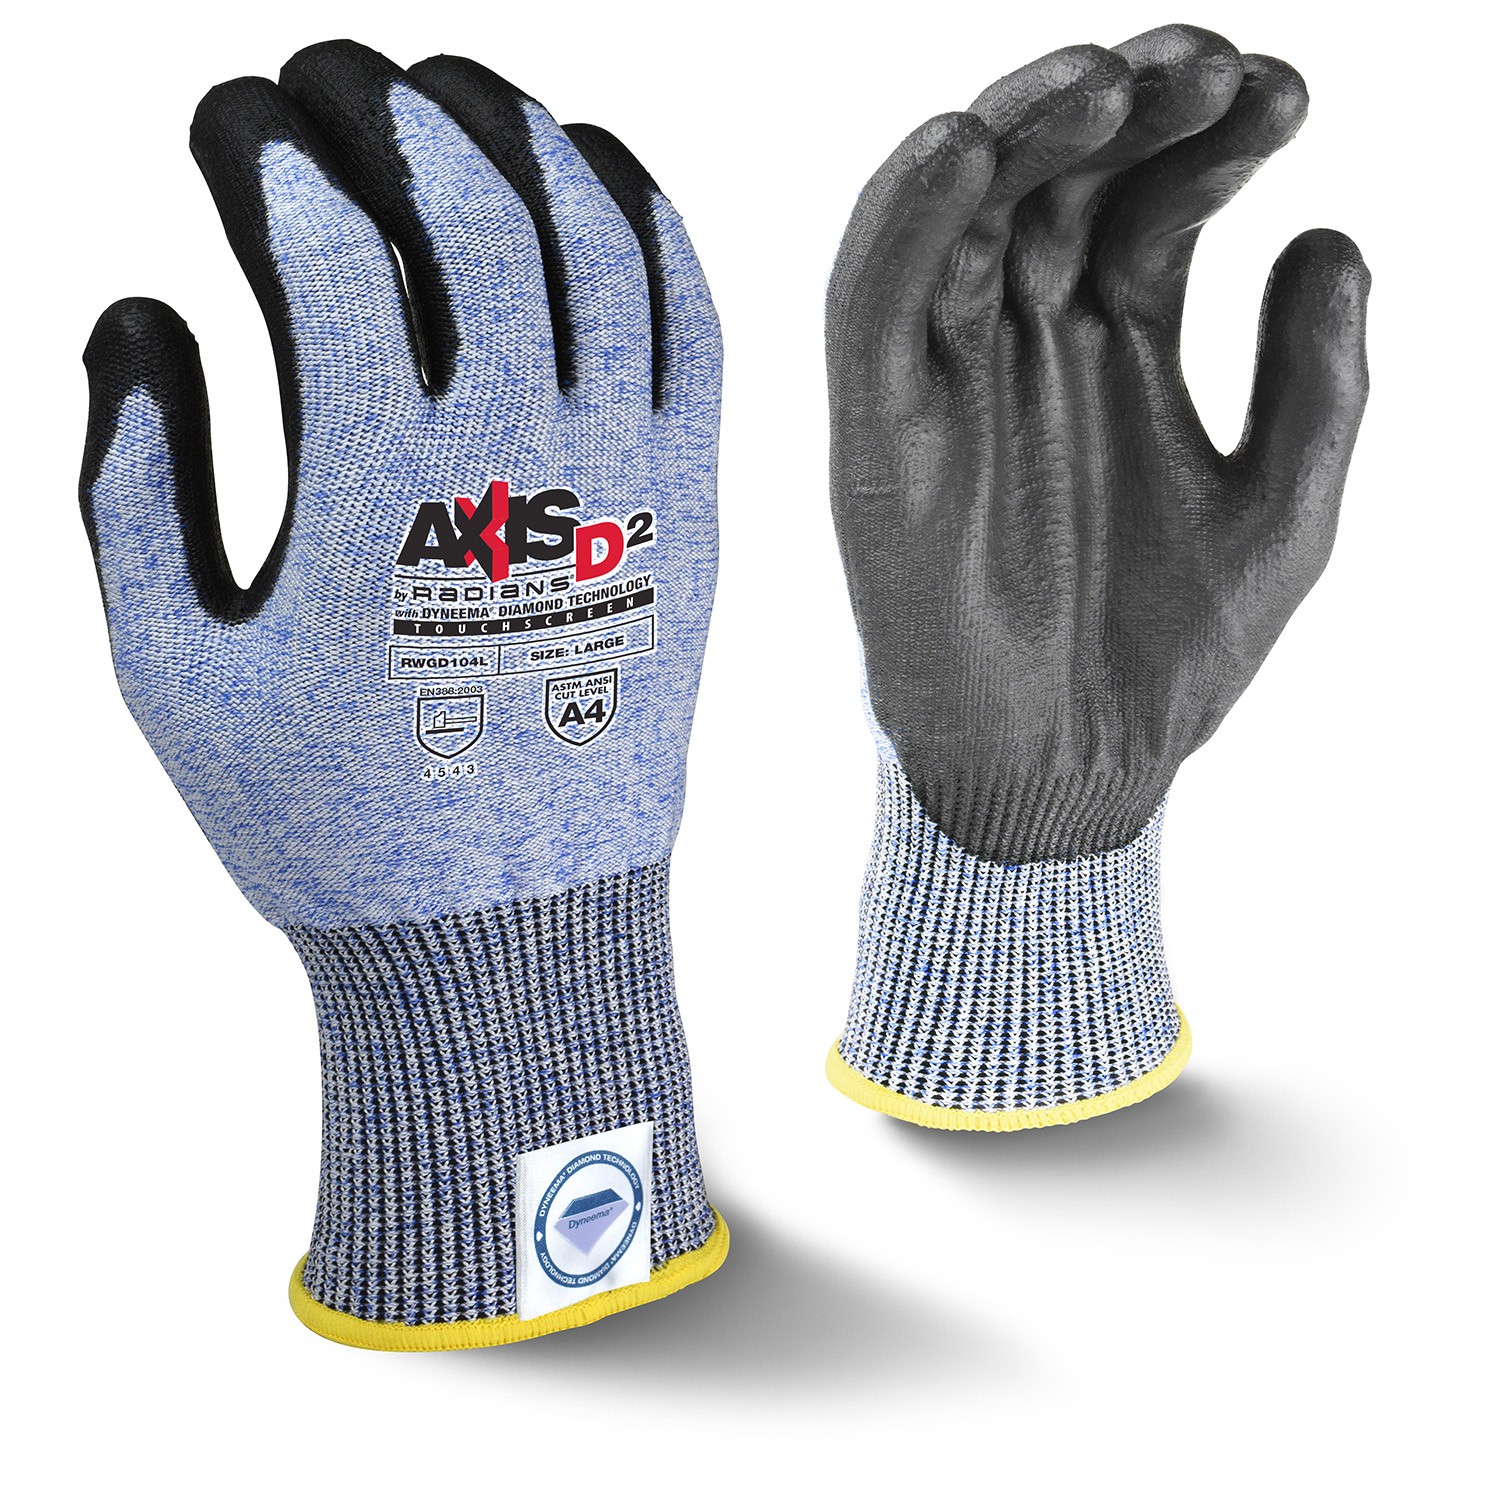 AXIS D2™Cut Protection Level A4 Touchscreen Glove with Dyneema® Diamond Technology (#RWGD104)